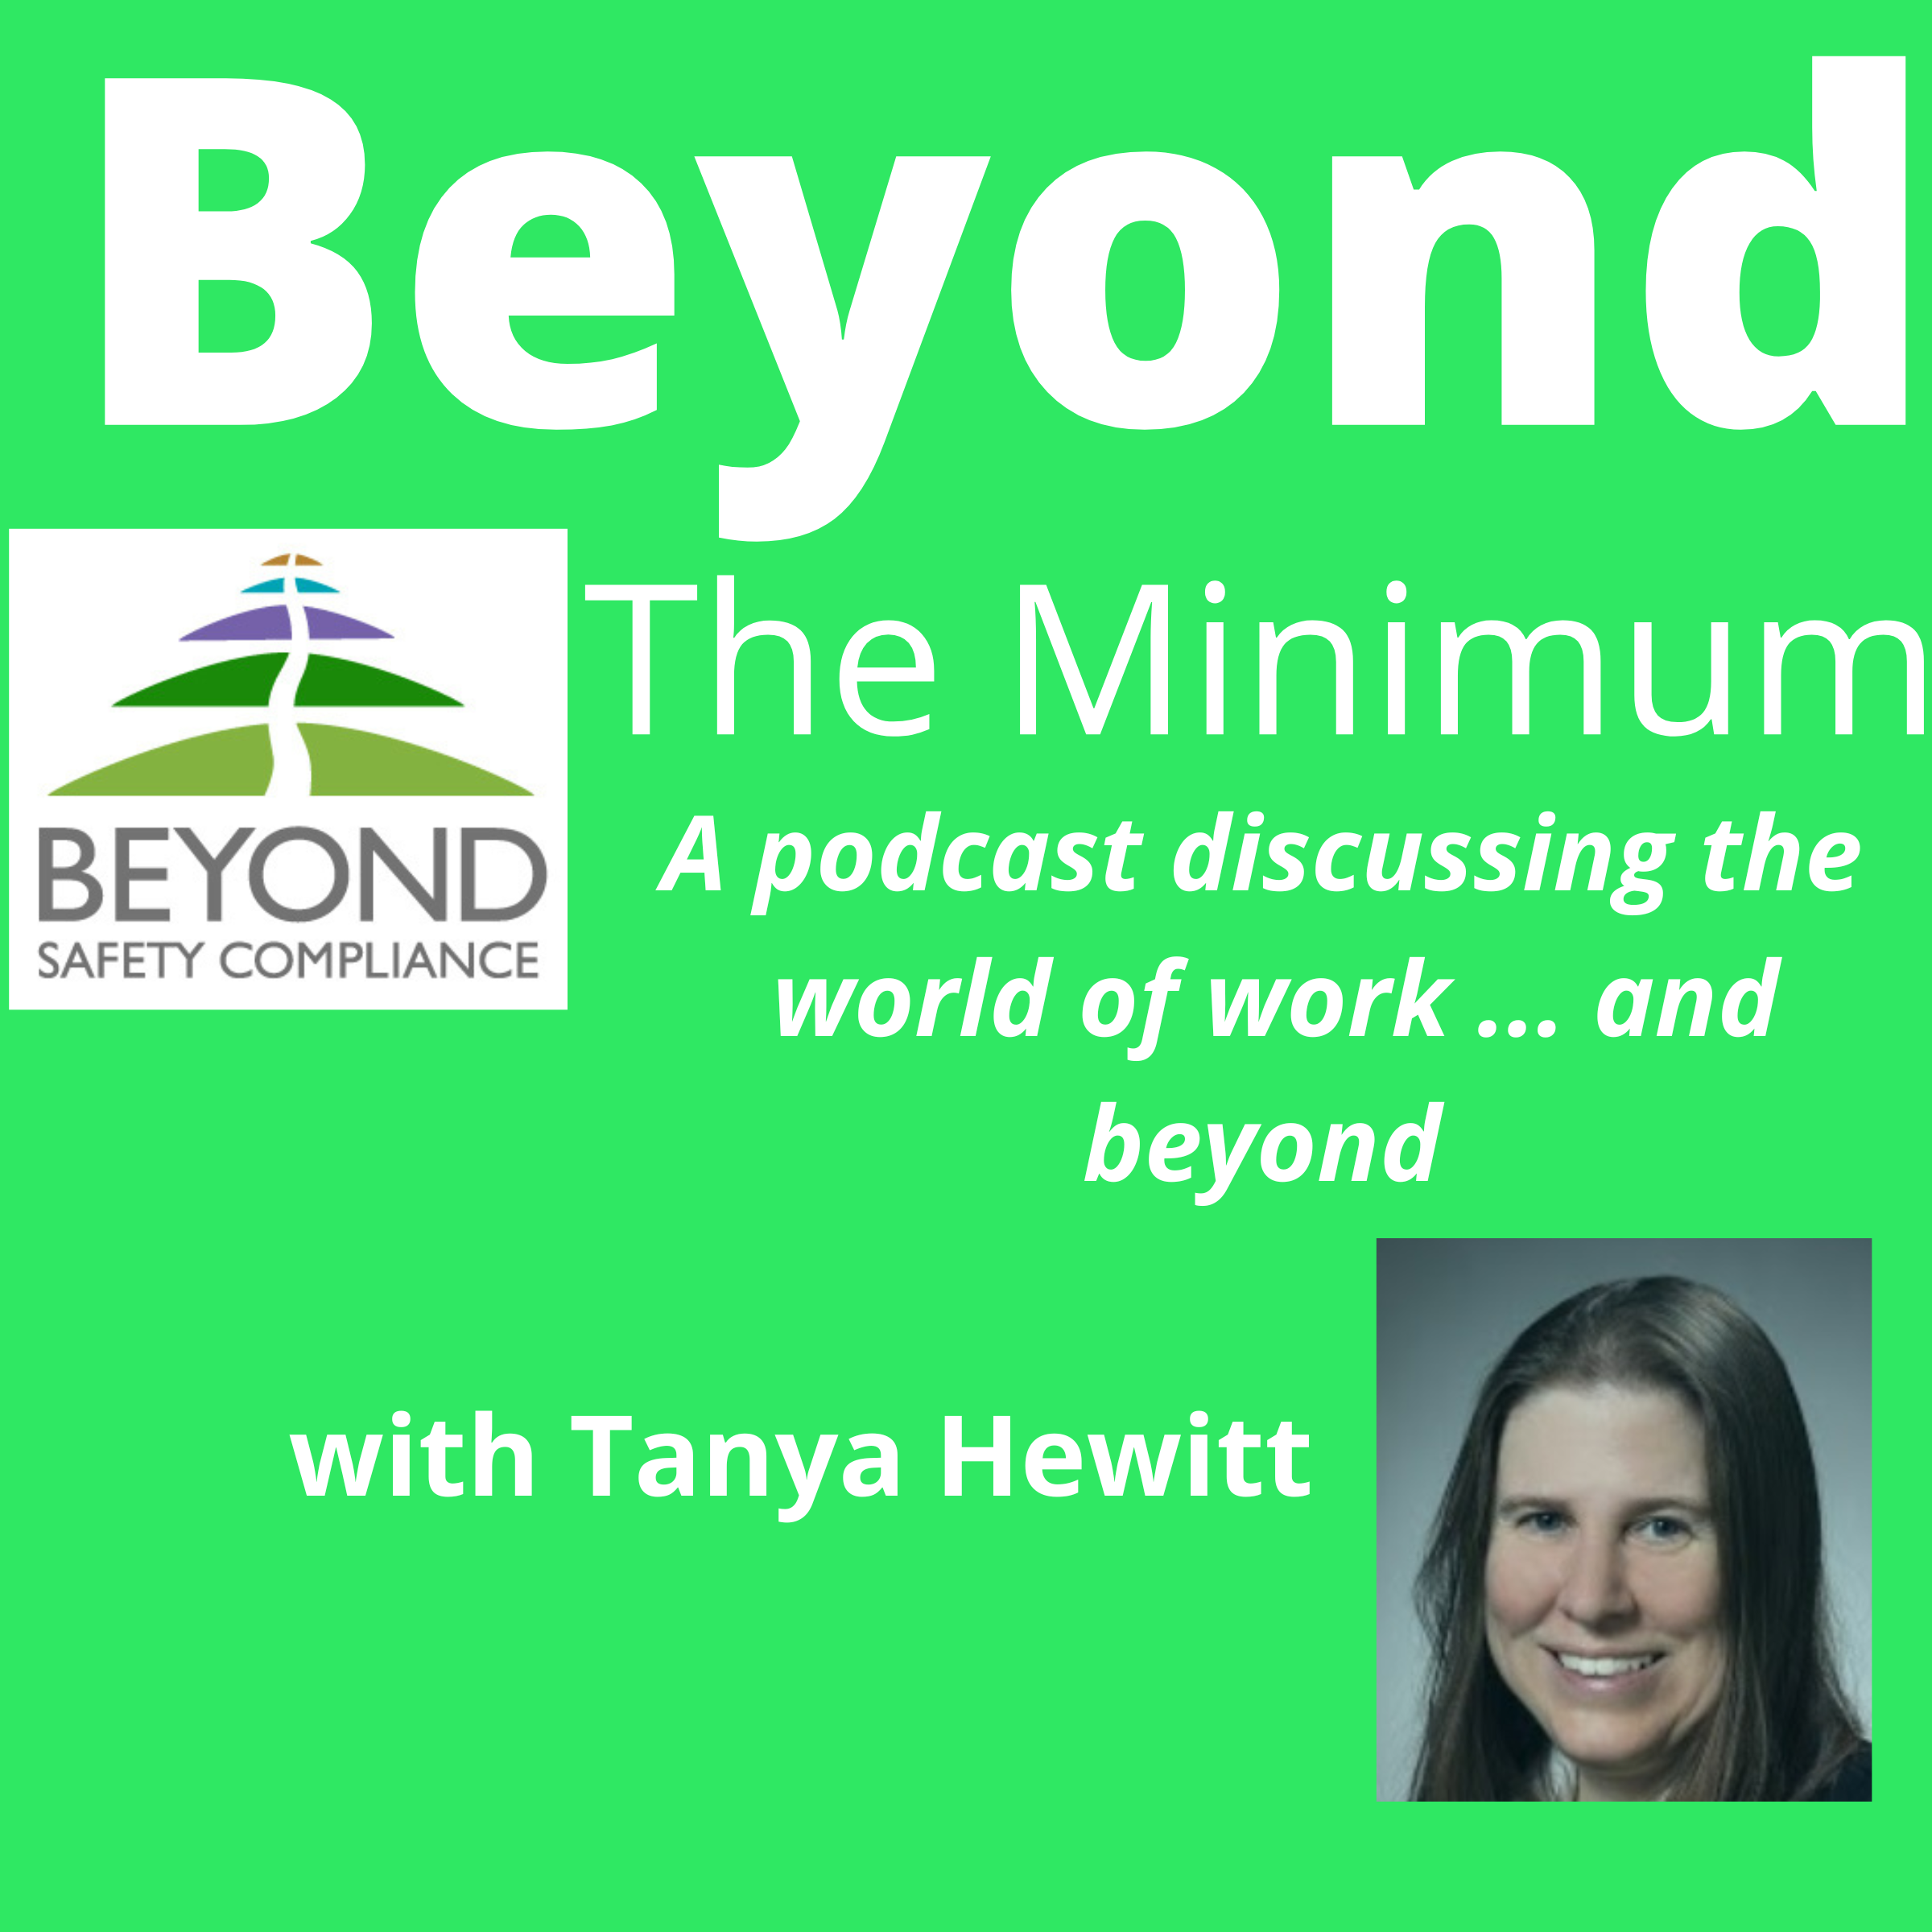 Beyond the Minimum - Exploring the world of work, and beyond